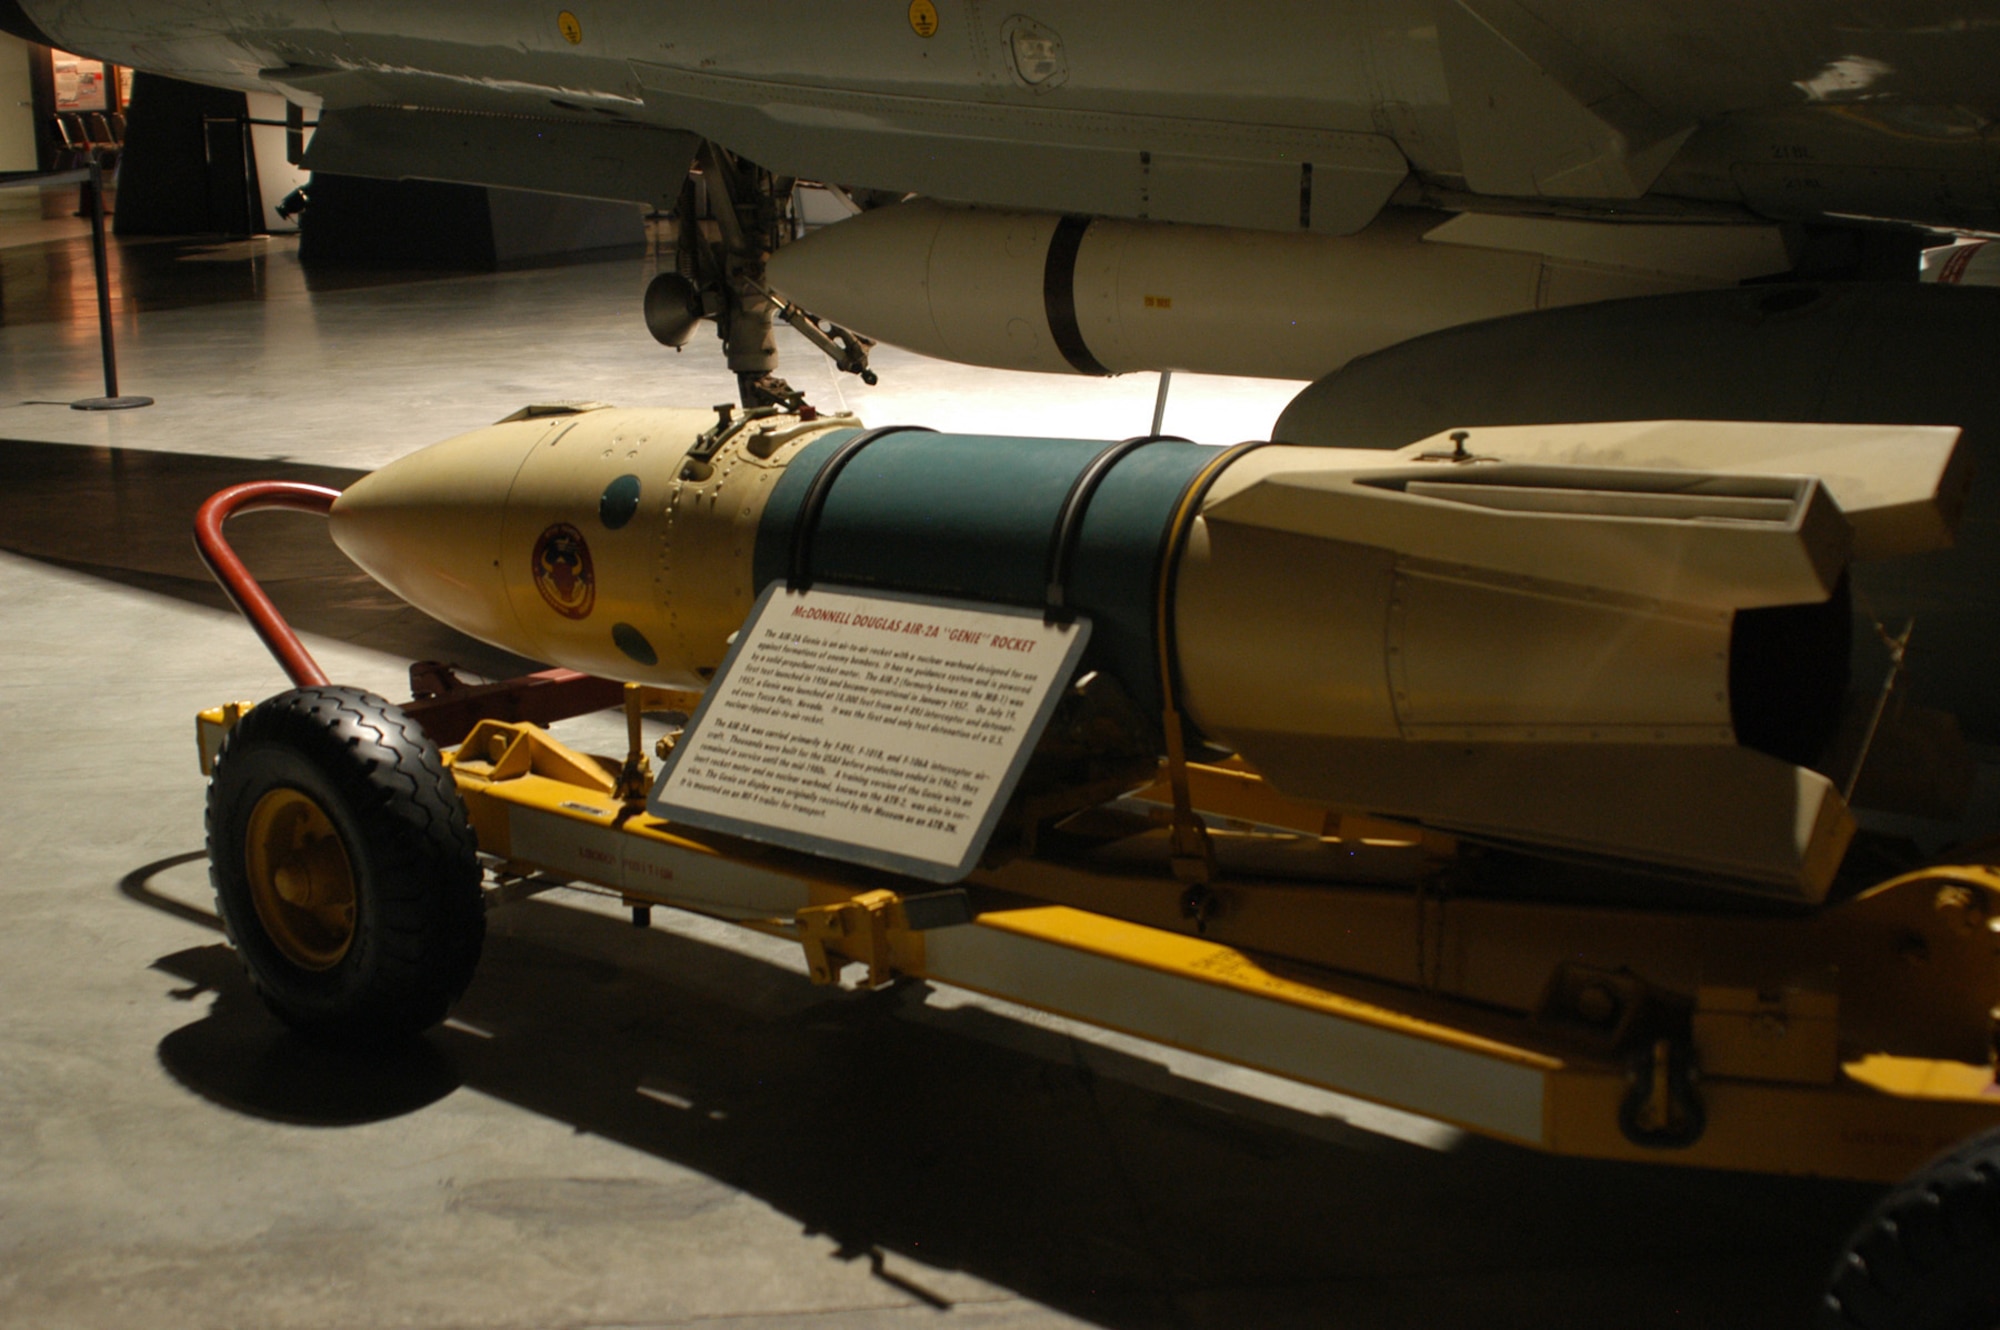 DAYTON, Ohio - McDonnell Douglas Air-2A Genie Rocket on display at the National Museum of the U.S. Air Force. (U.S. Air Force photo)